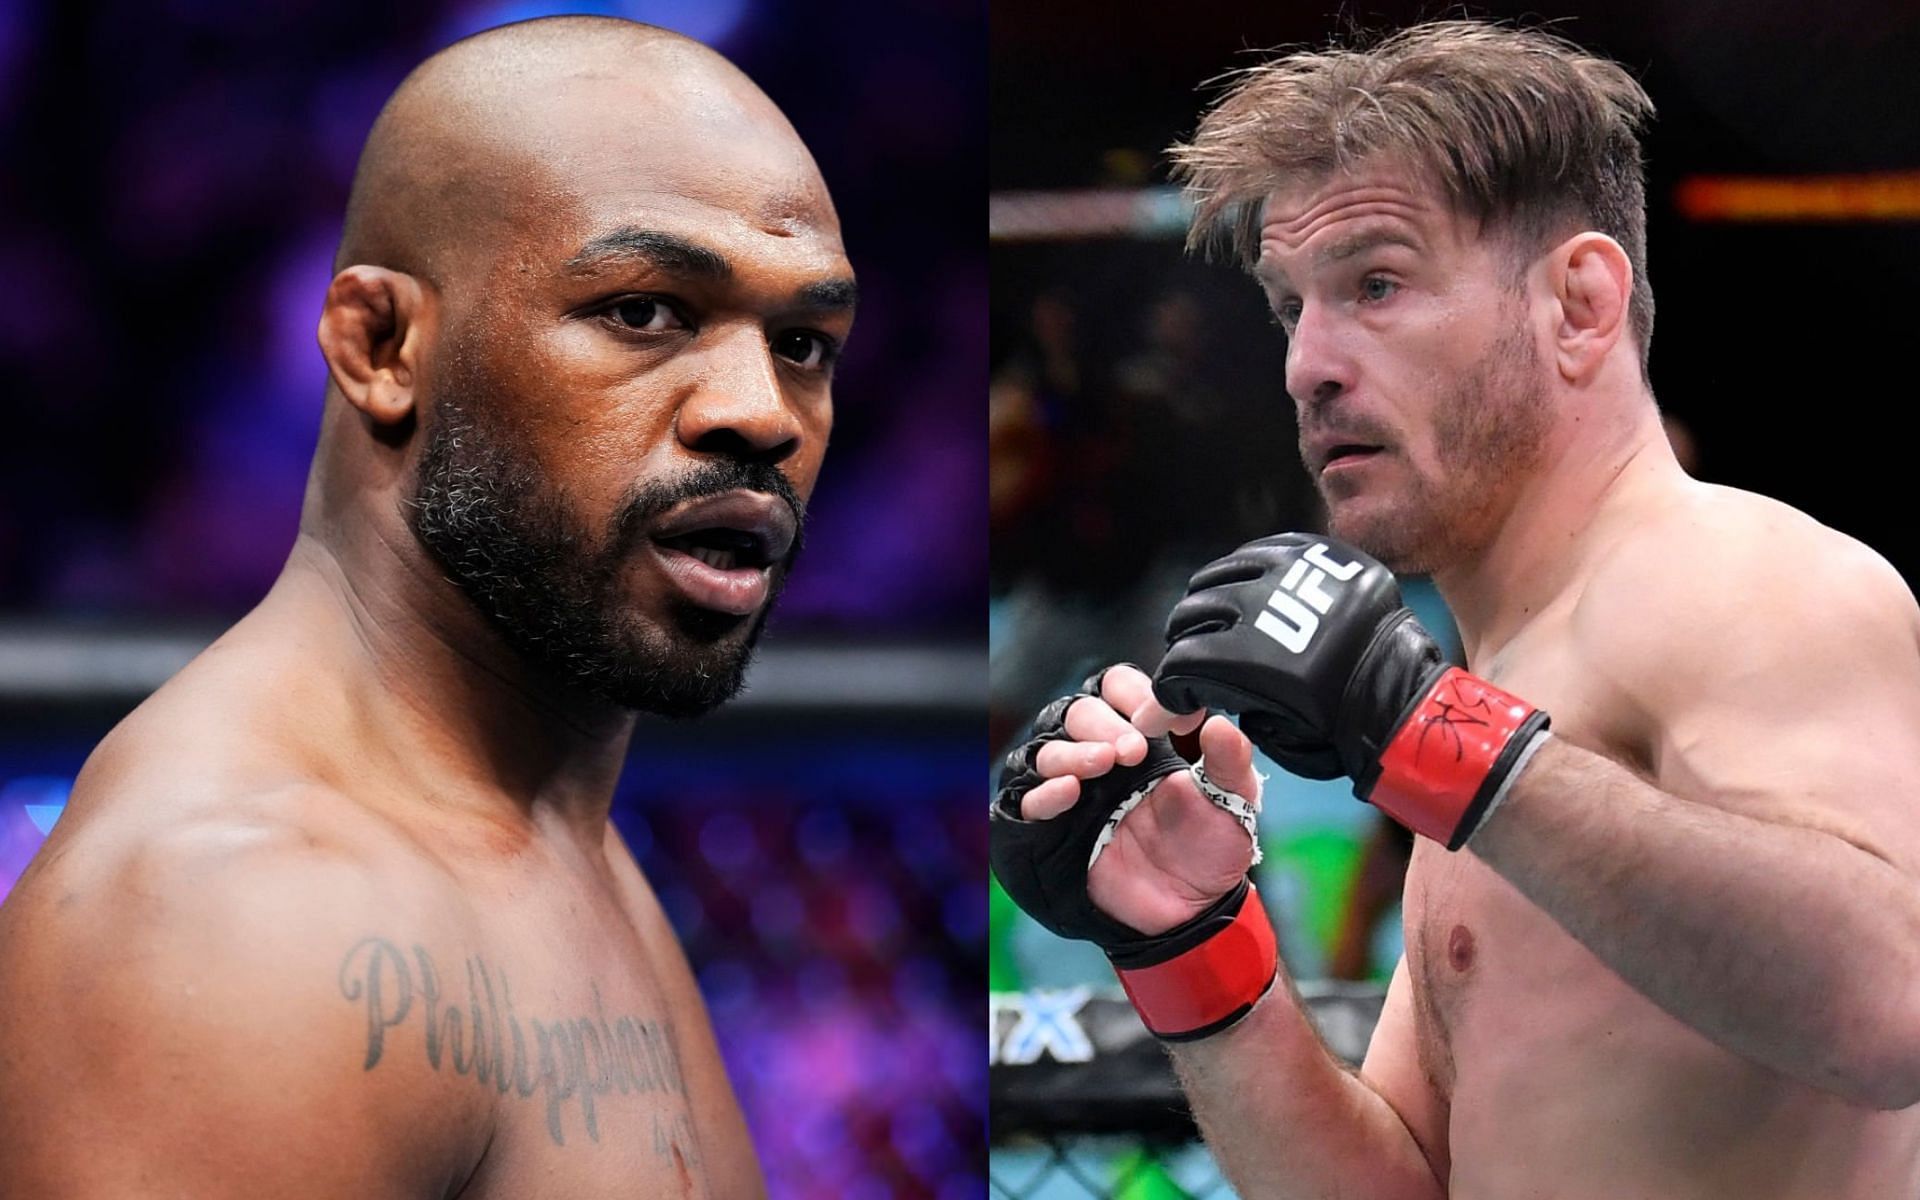 Jon Jones will face a tough test against Stipe Miocic, claims former opponent of 